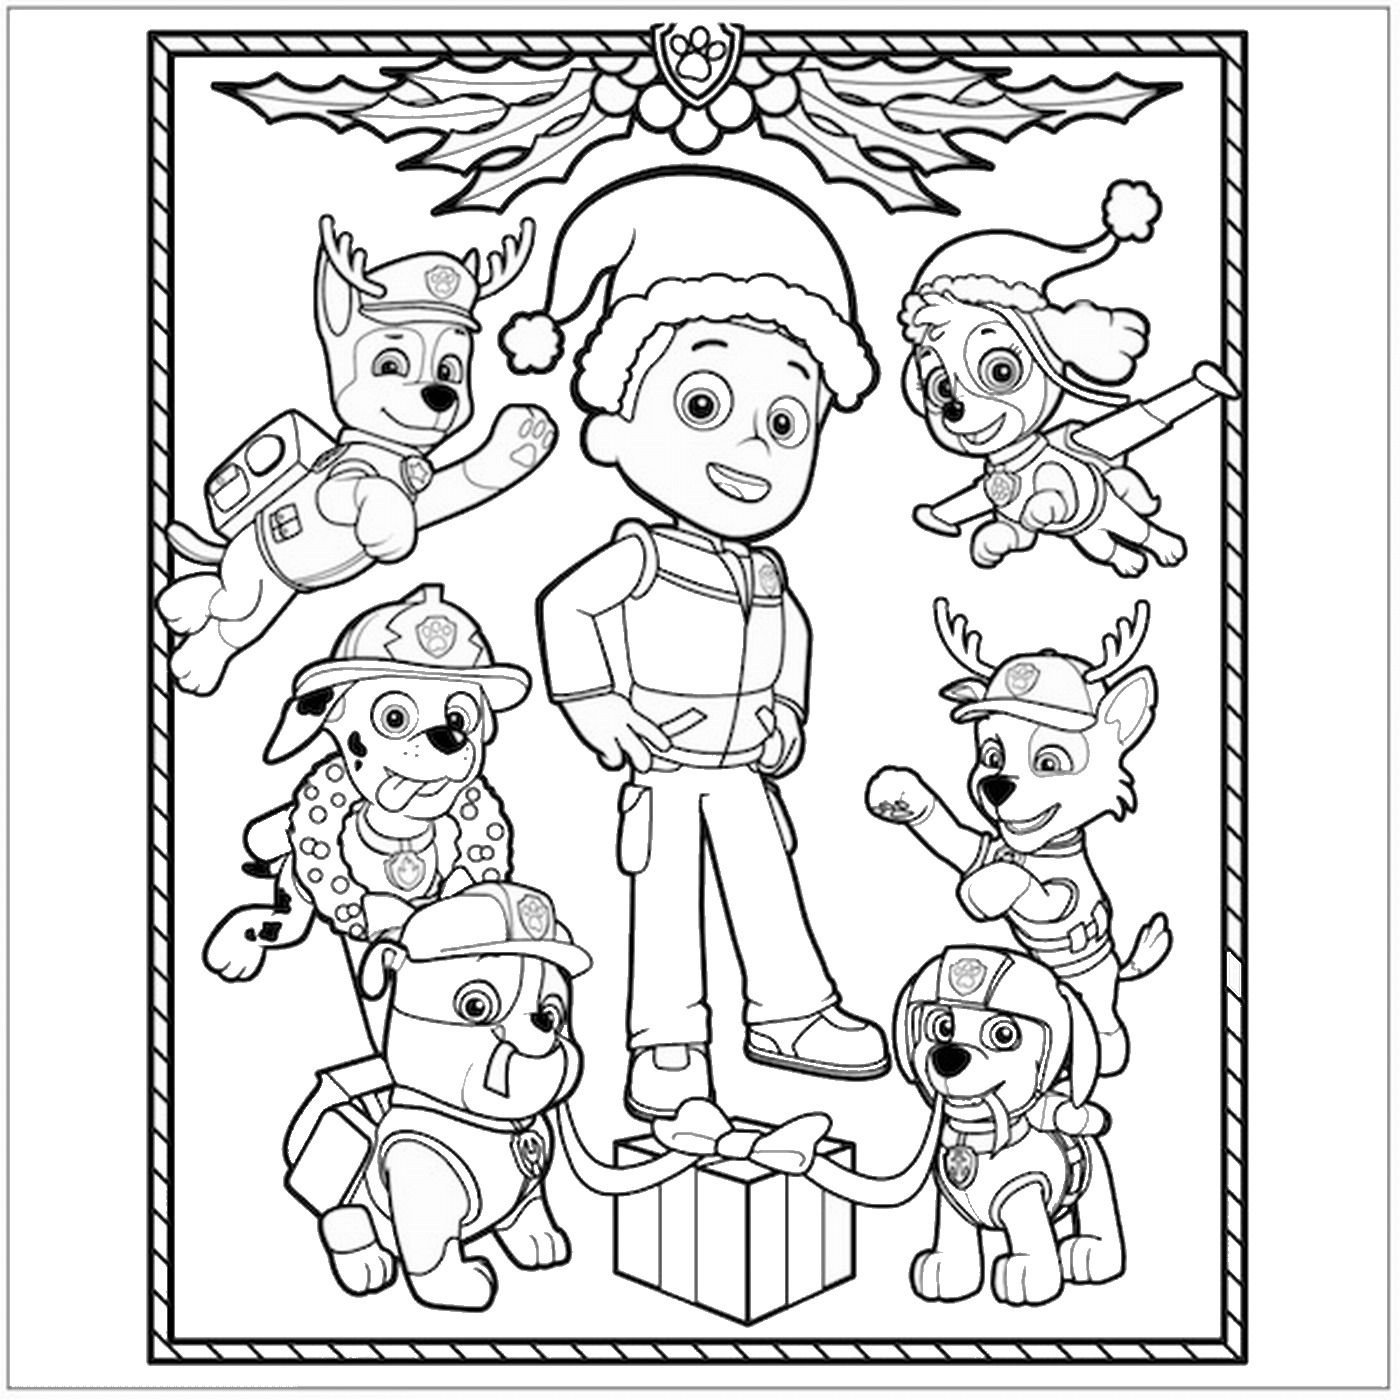 Paw patrol christmas coloring pages printable for free download